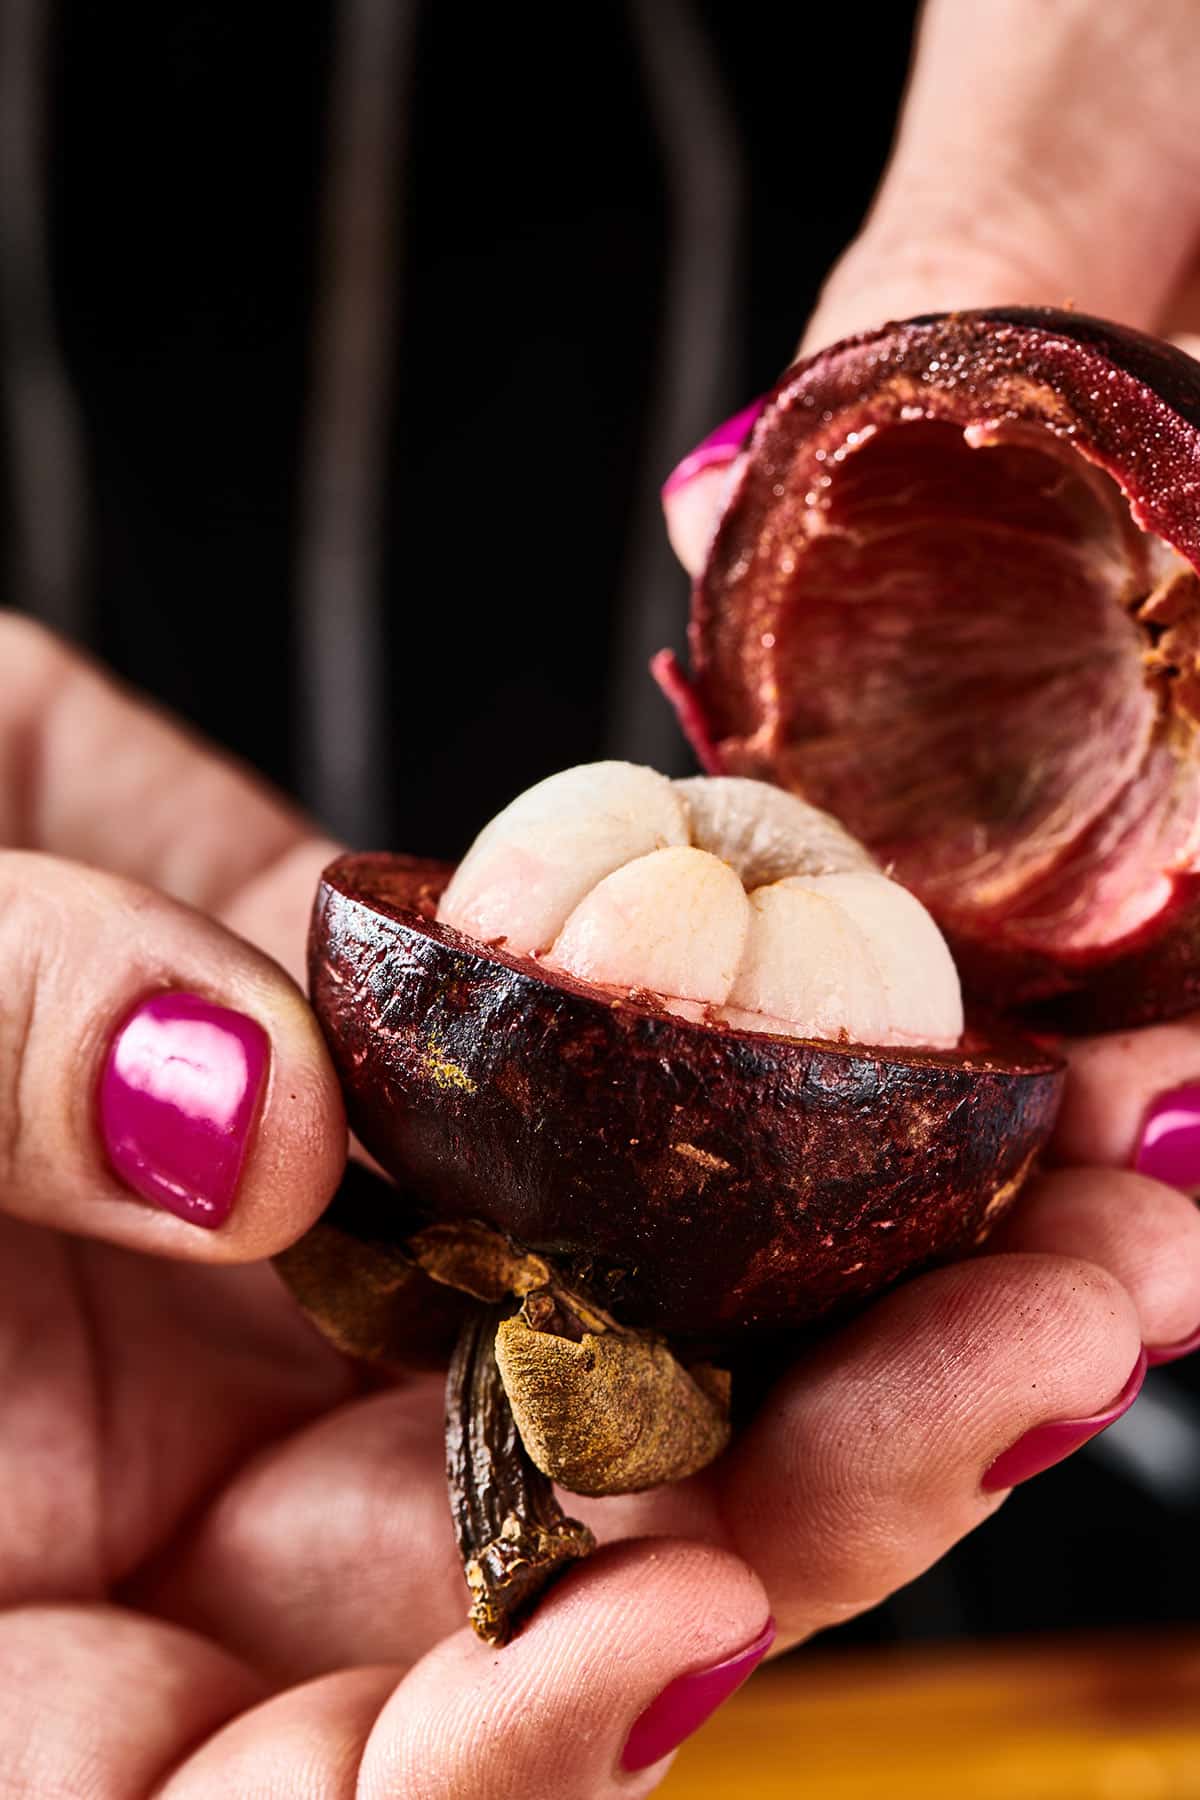 Woman holding an open mangosteen to reveal the fruit's white flesh.